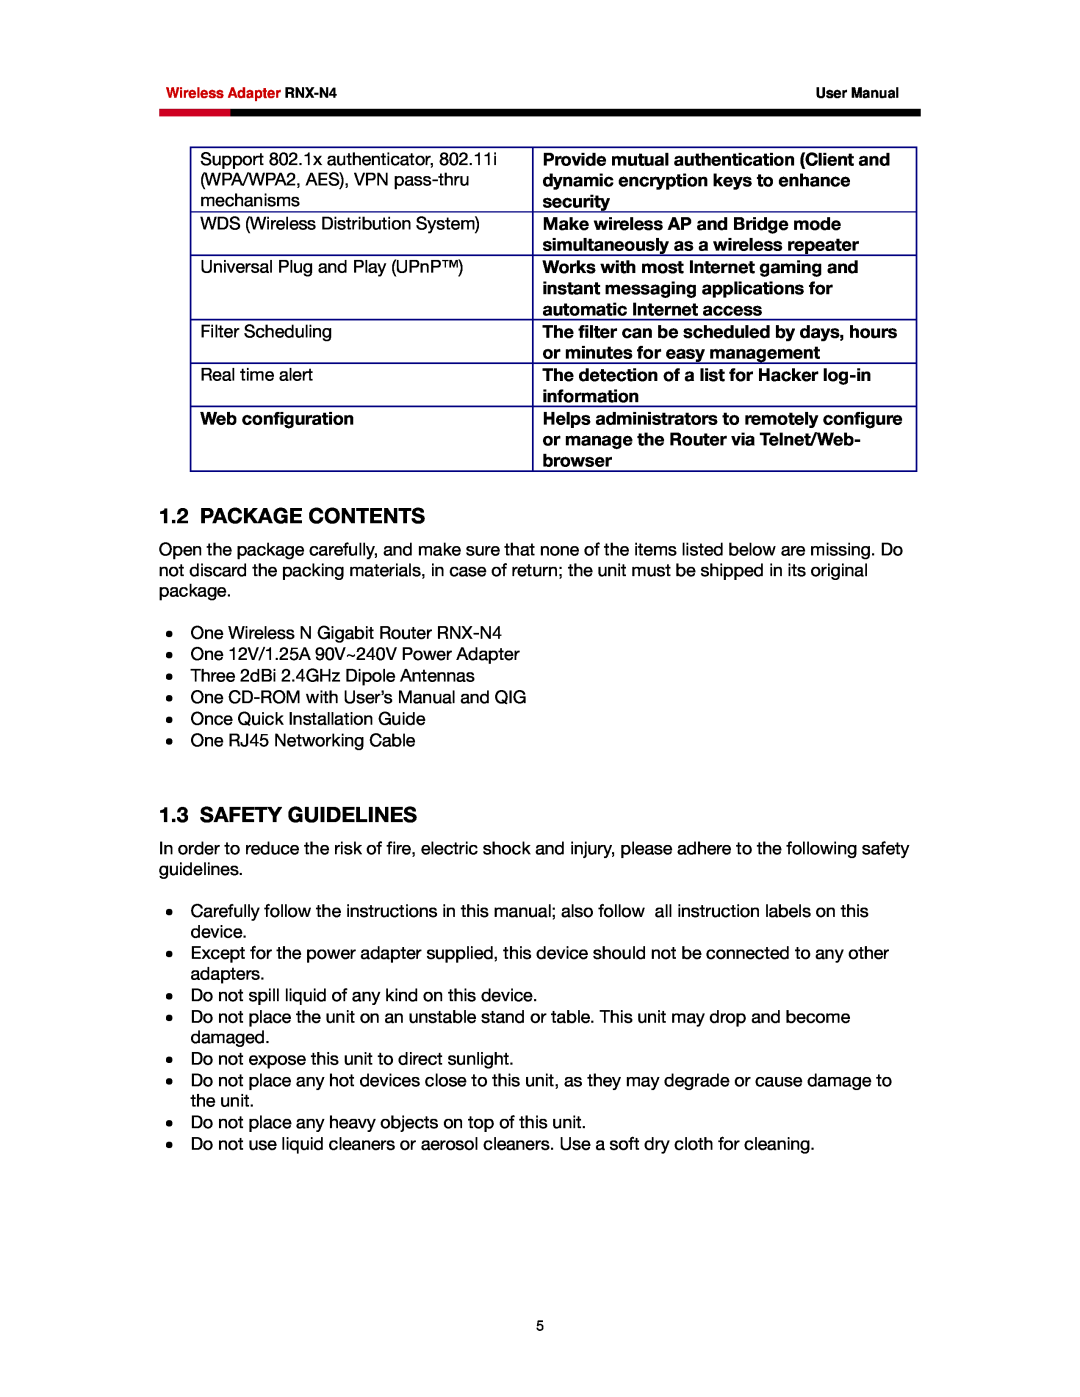 Rosewill RNX-N4 user manual Package Contents, Safety Guidelines 